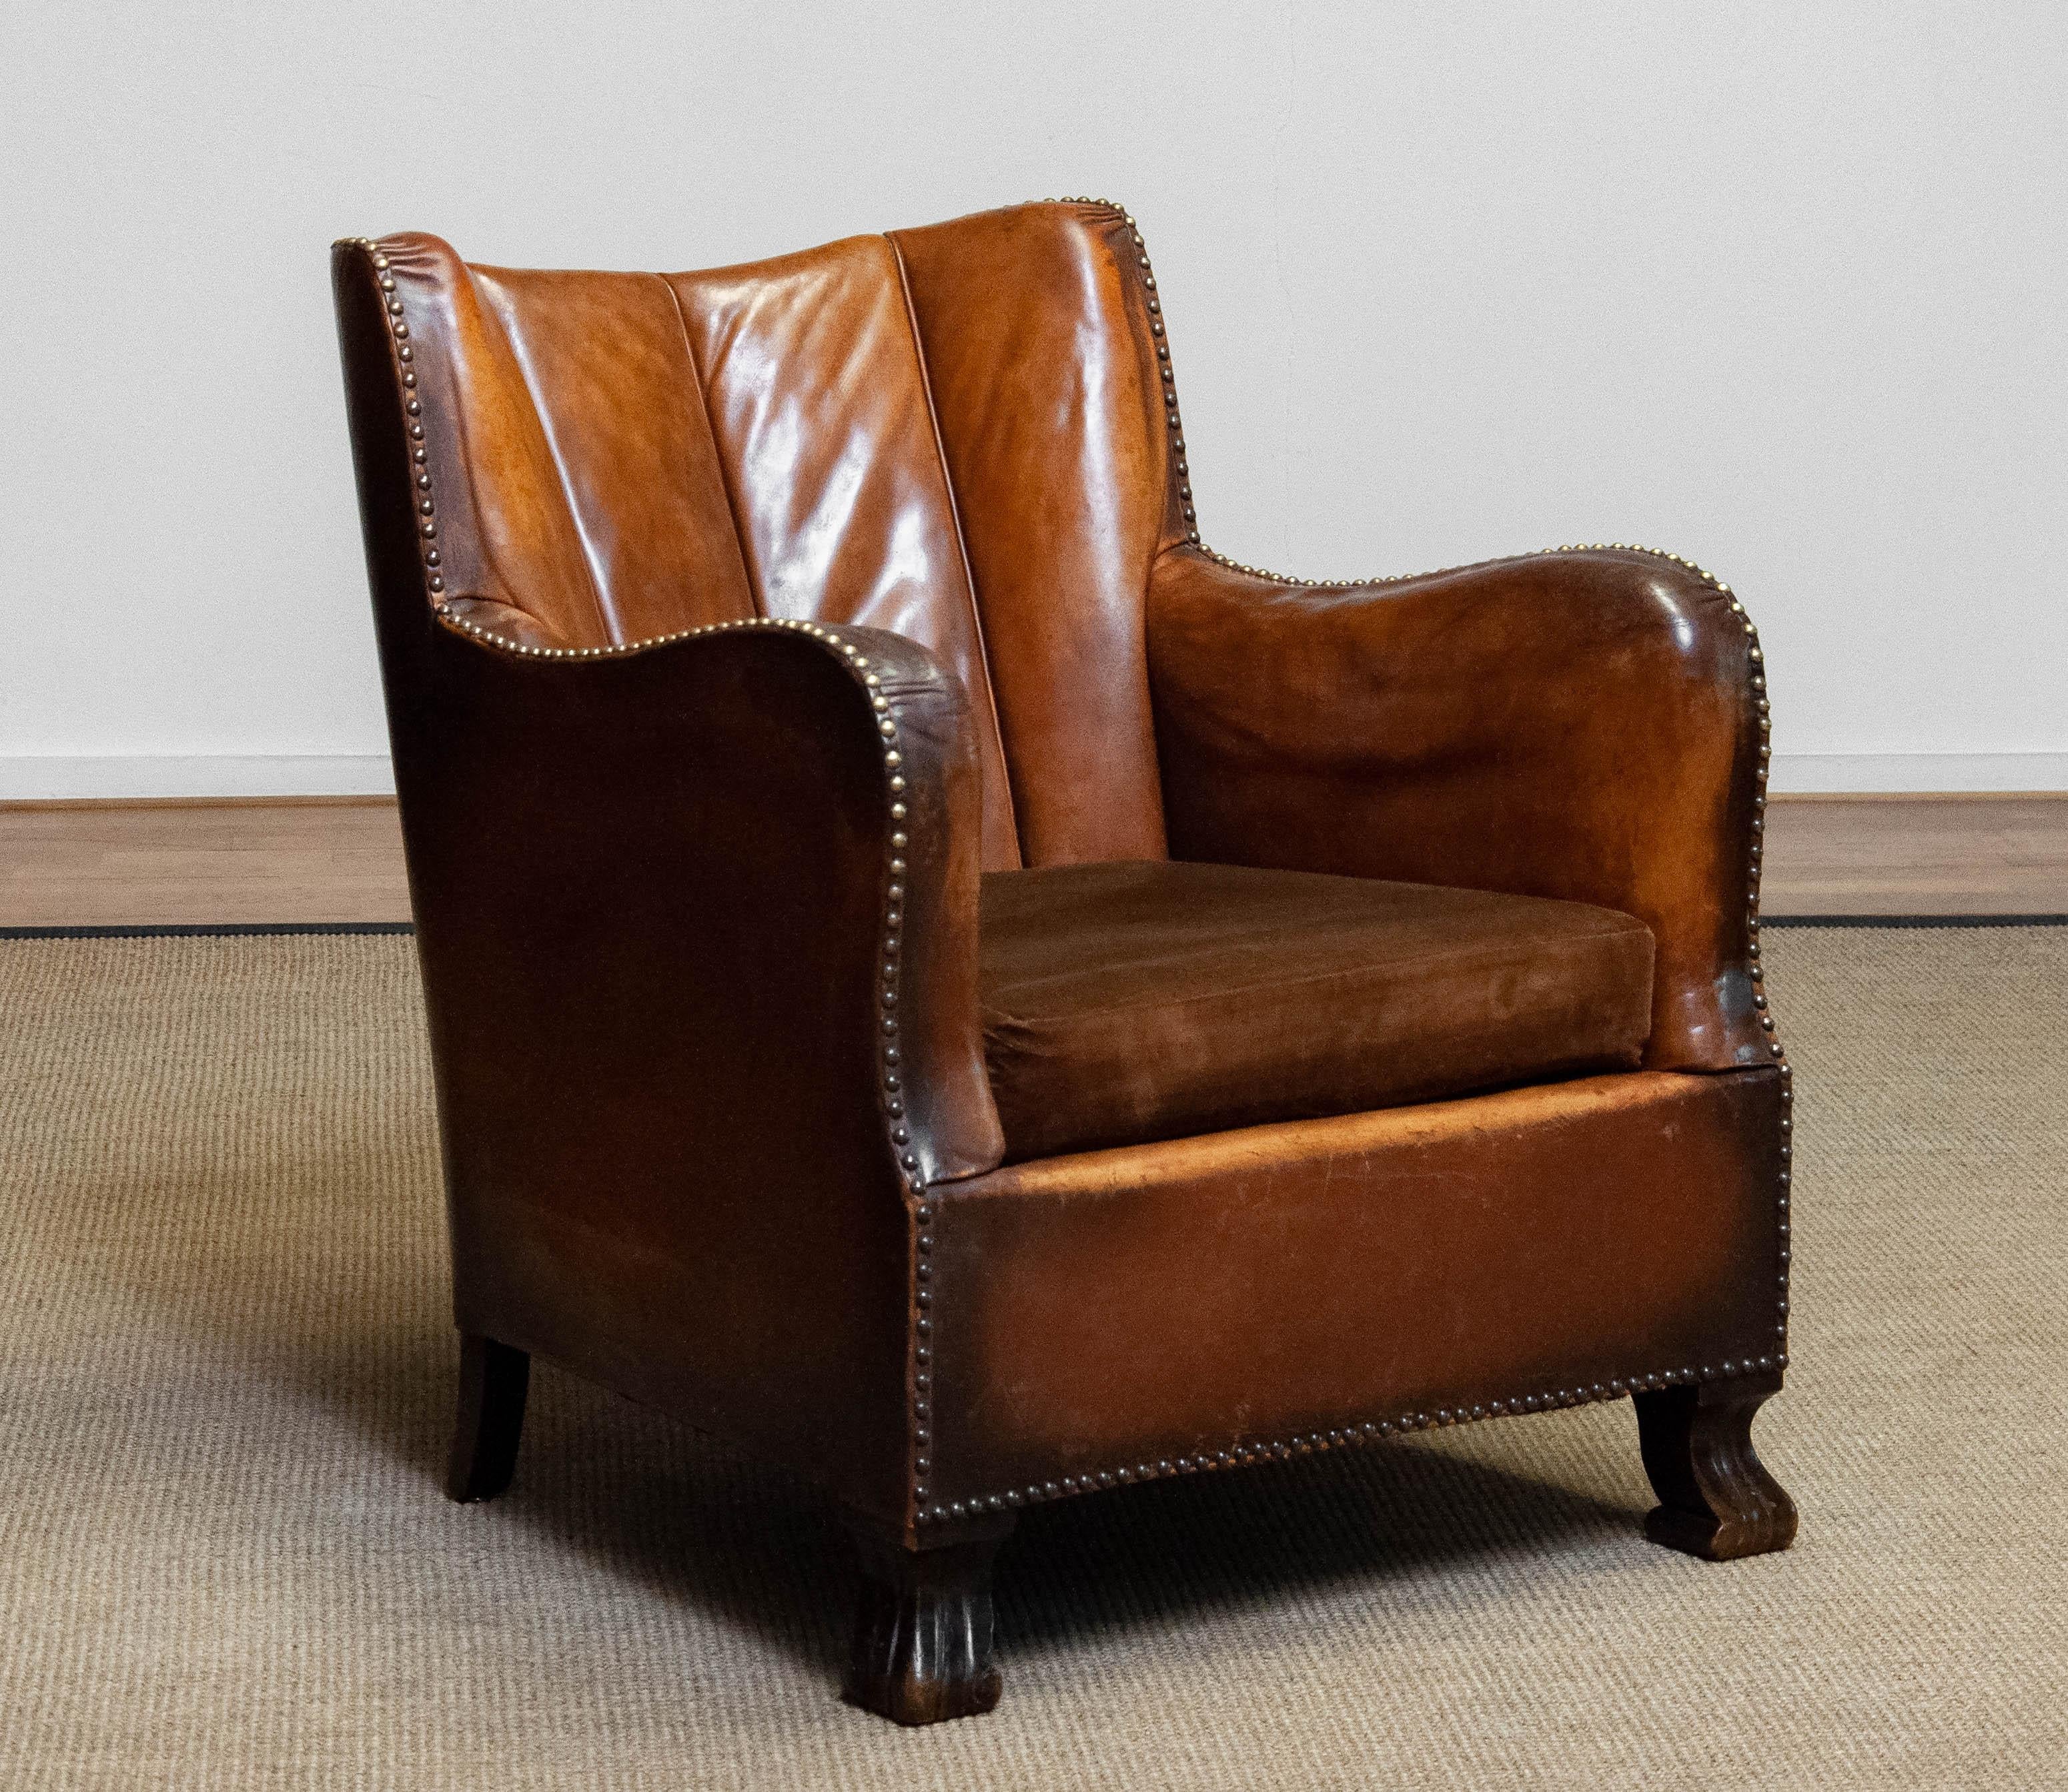 Very characteristic tan brown leather sugar / club chair from around the 1940s from Denmark and attributed to Oskar Hansen. This club chair in her complete and original condition. The absolute fantastic patina on the leather combined with the brass